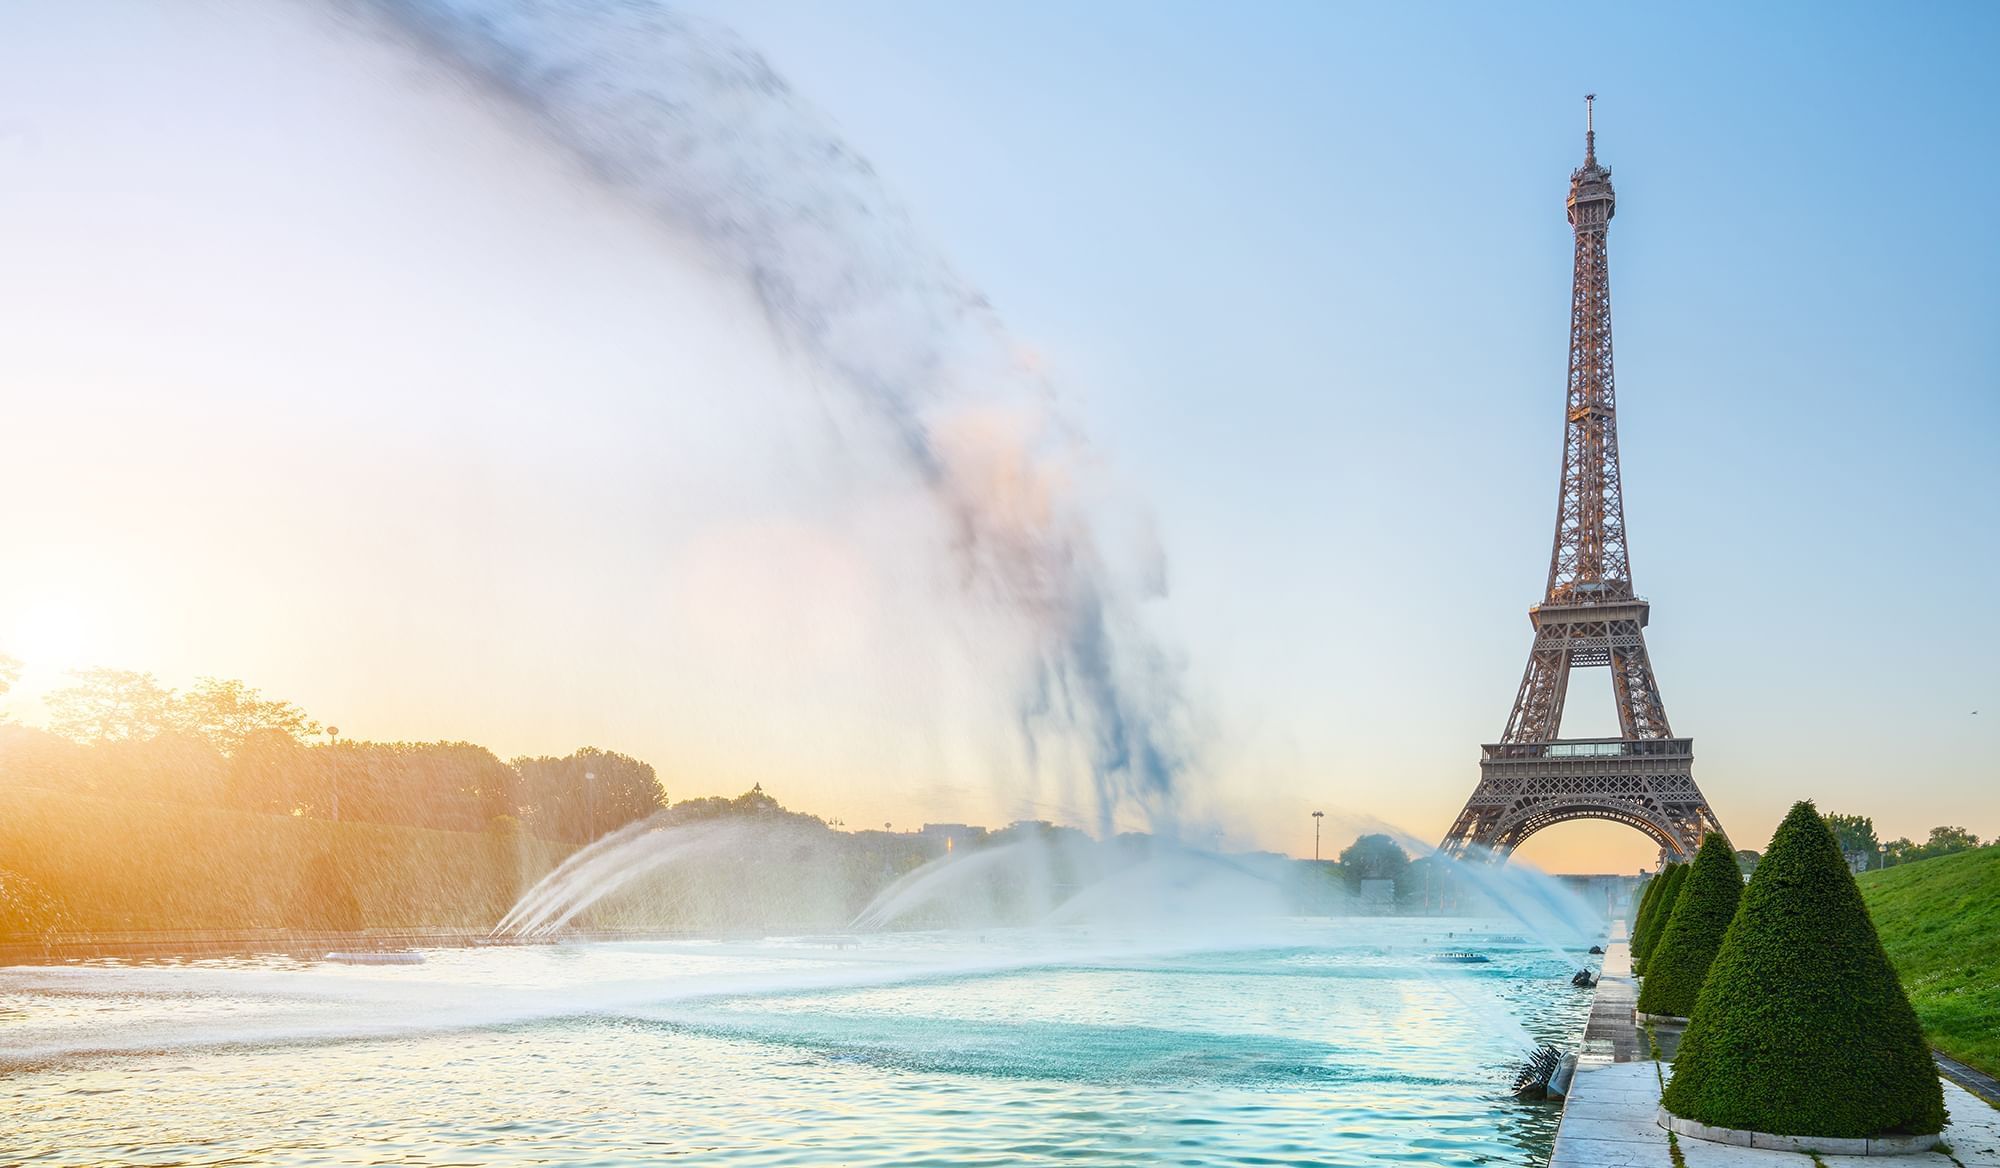 Eiffel tower and water